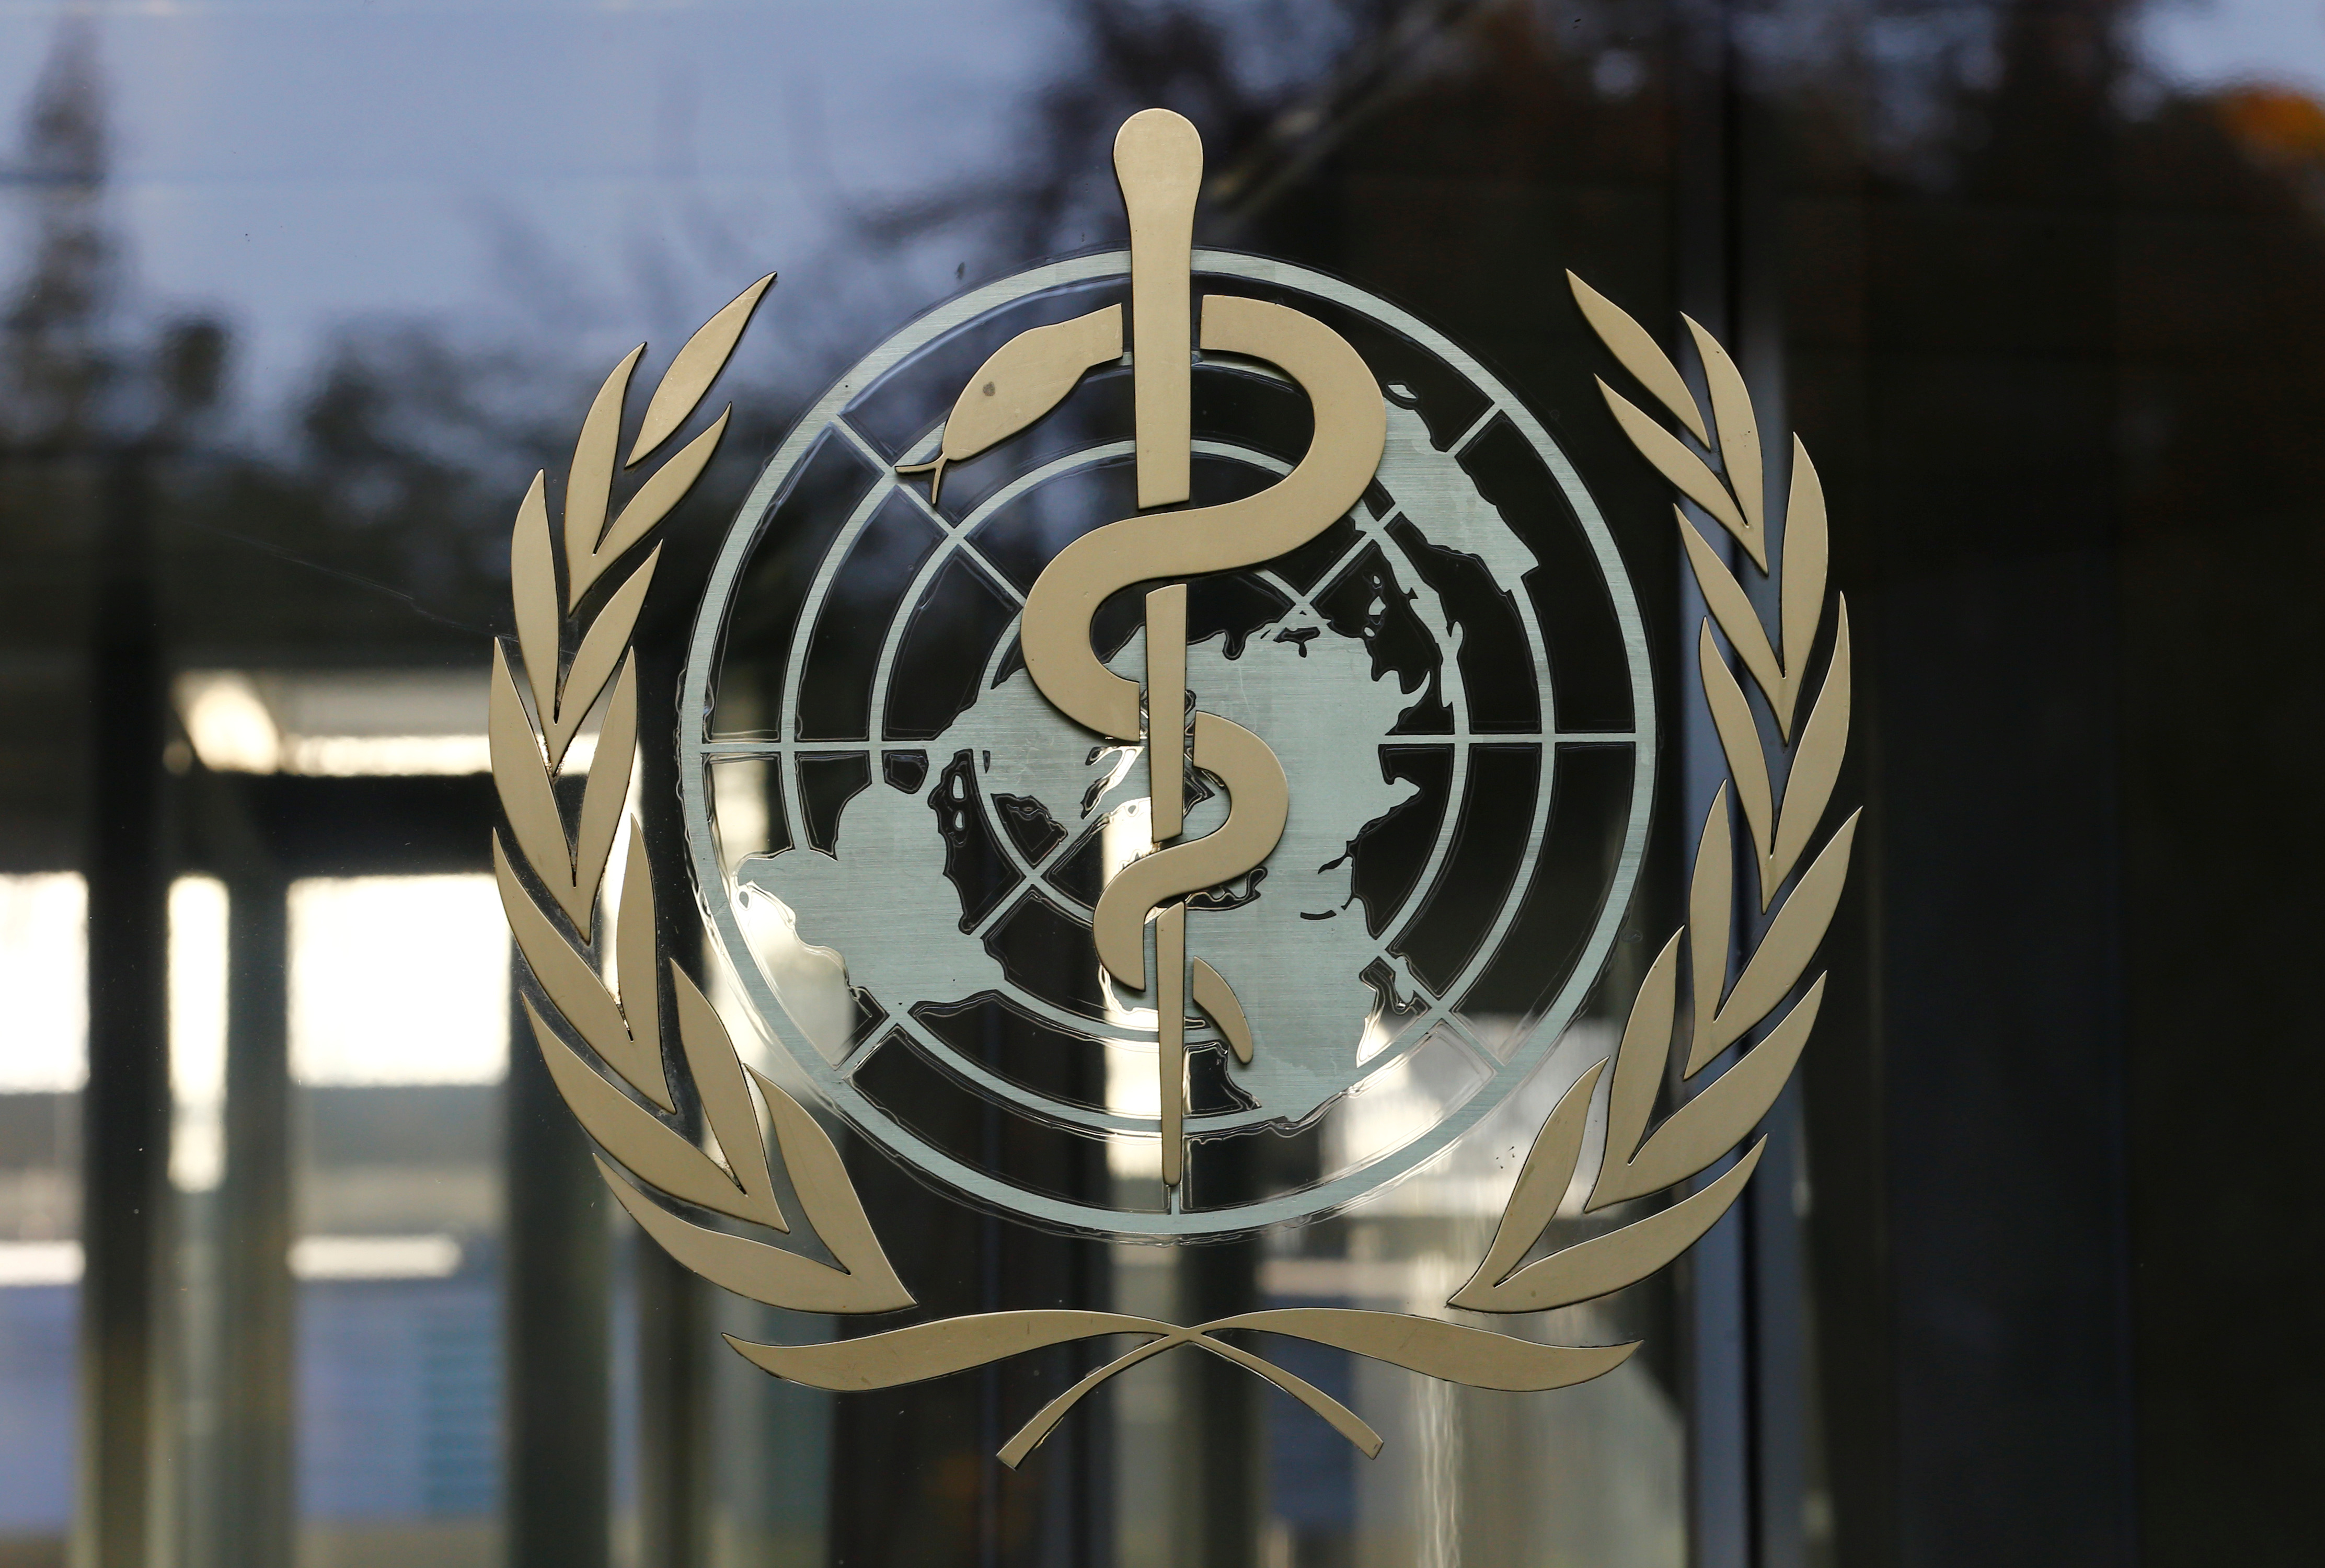 There is a graphic logo on the headquarters of the World Health Organization in Geneva